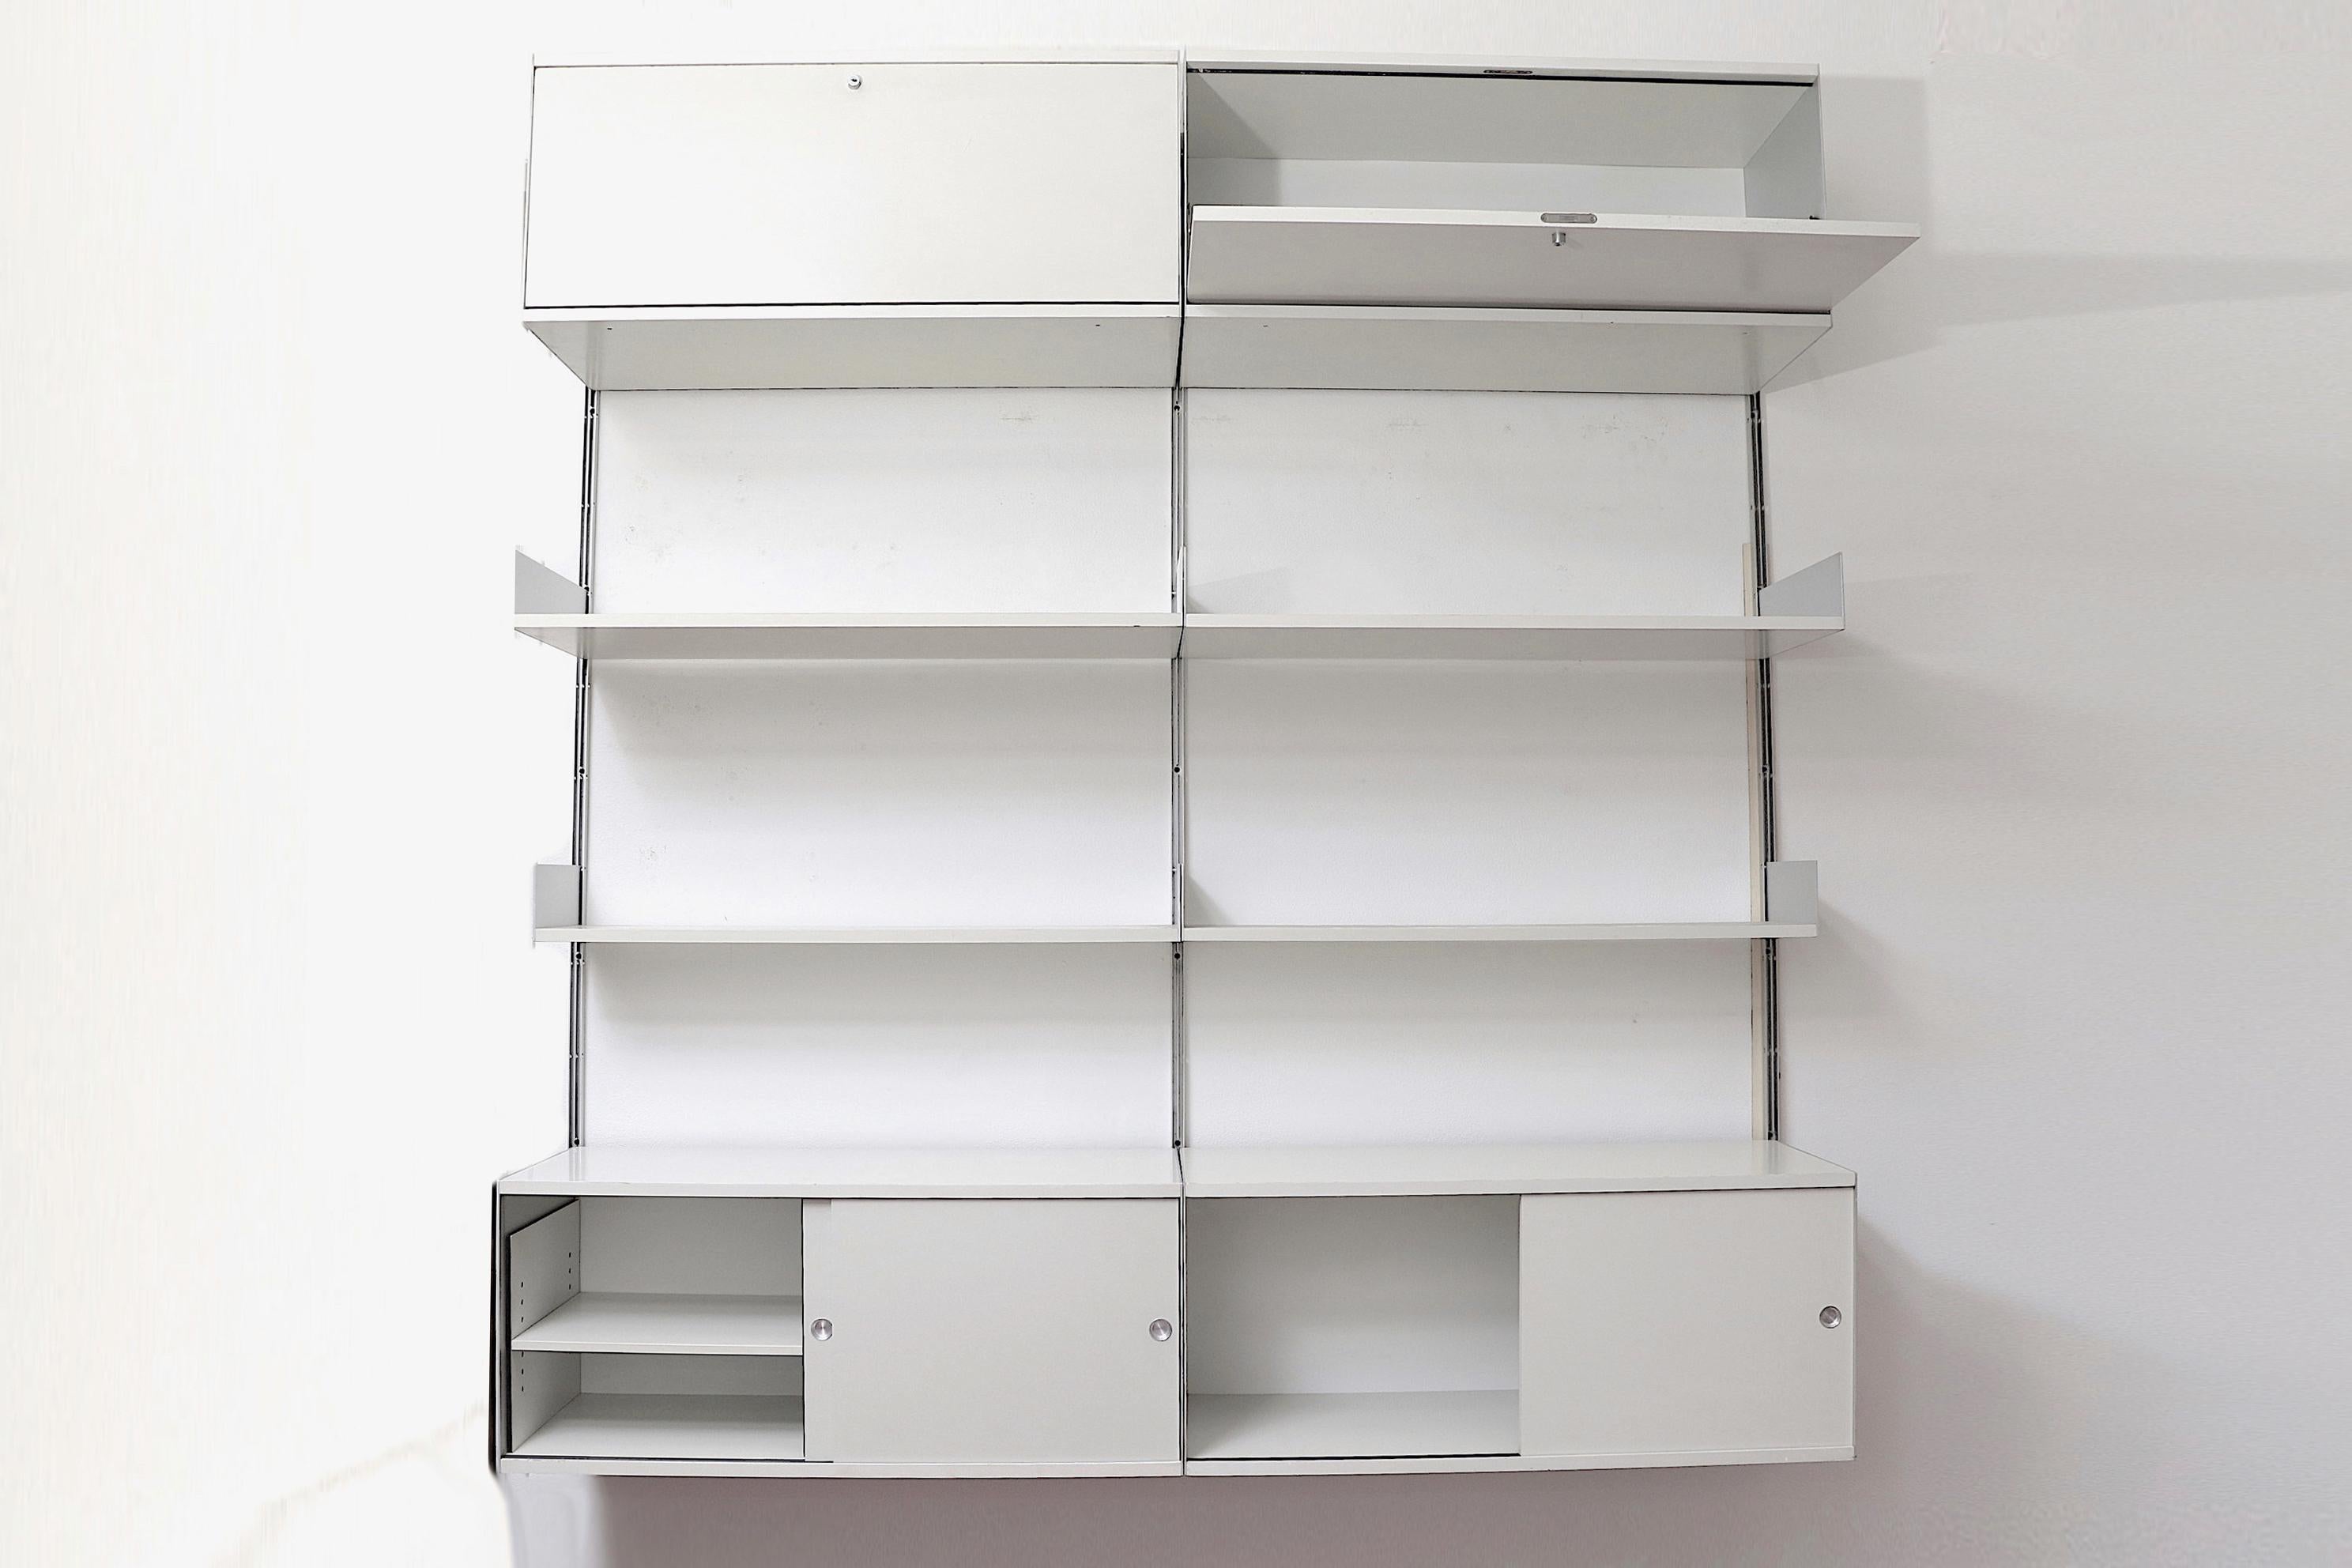 Handsome 2-section dieter rams industrial shelving unit on aluminum risers with storage cabinets and adjustable shelves. 2 lower drop-down formica cabinets with keys and 6 adjustable formica. In original condition with visible wear some chipping and